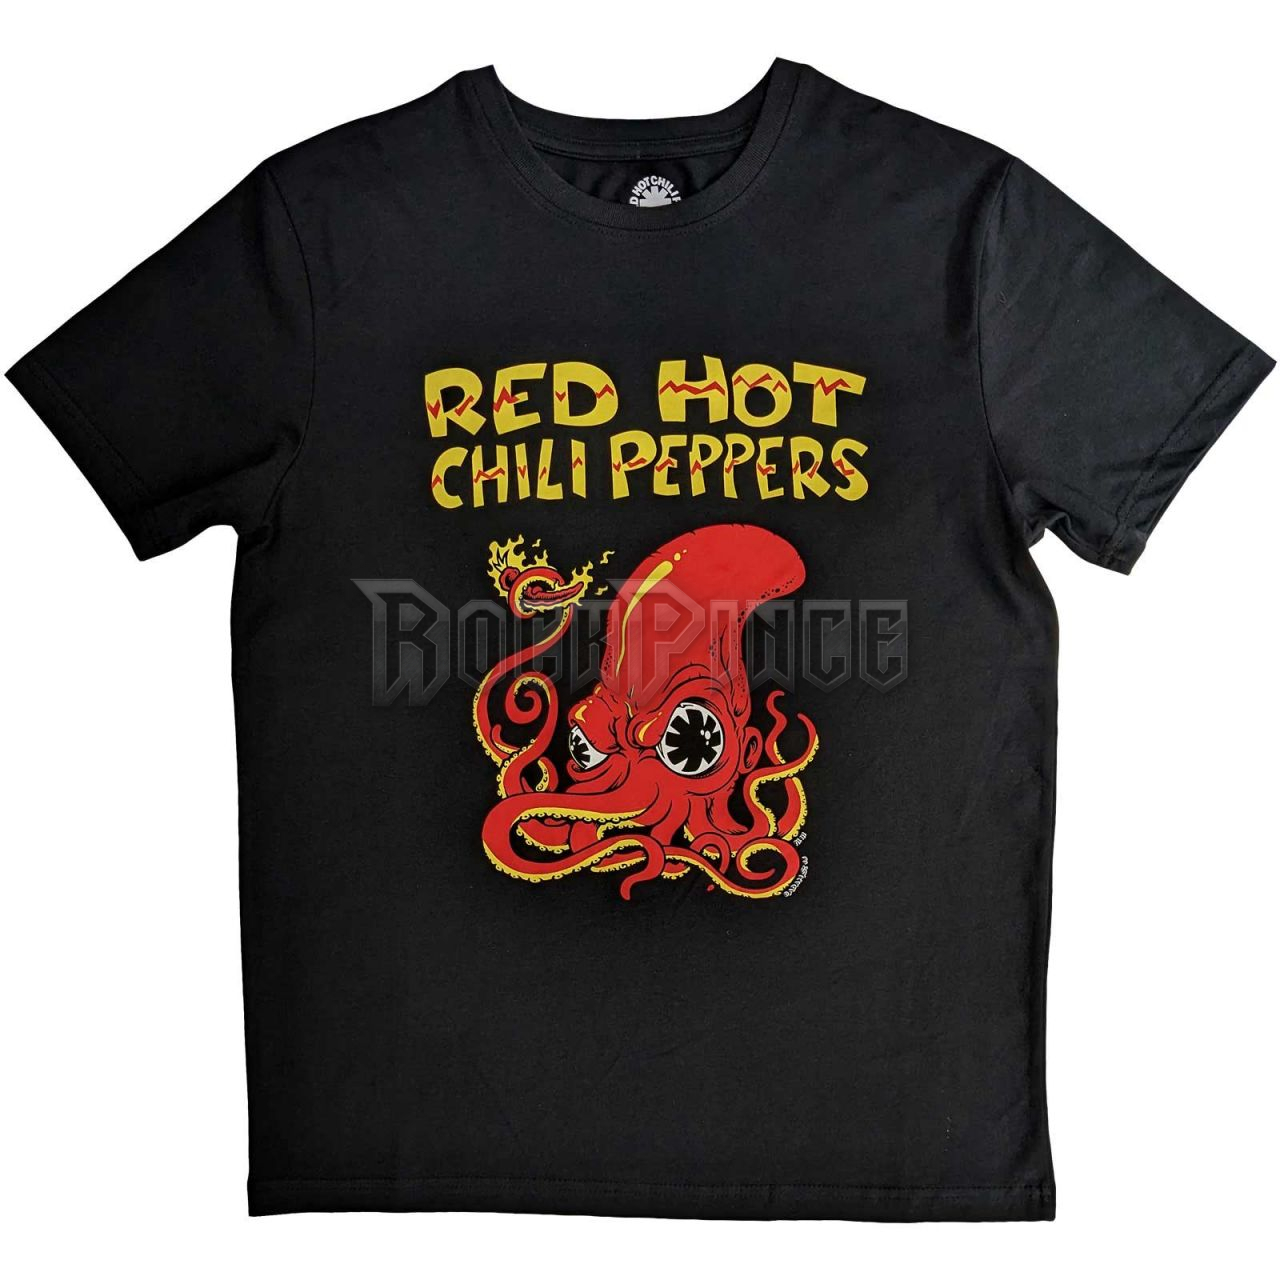 Red Hot Chili Peppers - Octopus - unisex póló - RHCPTS20MB